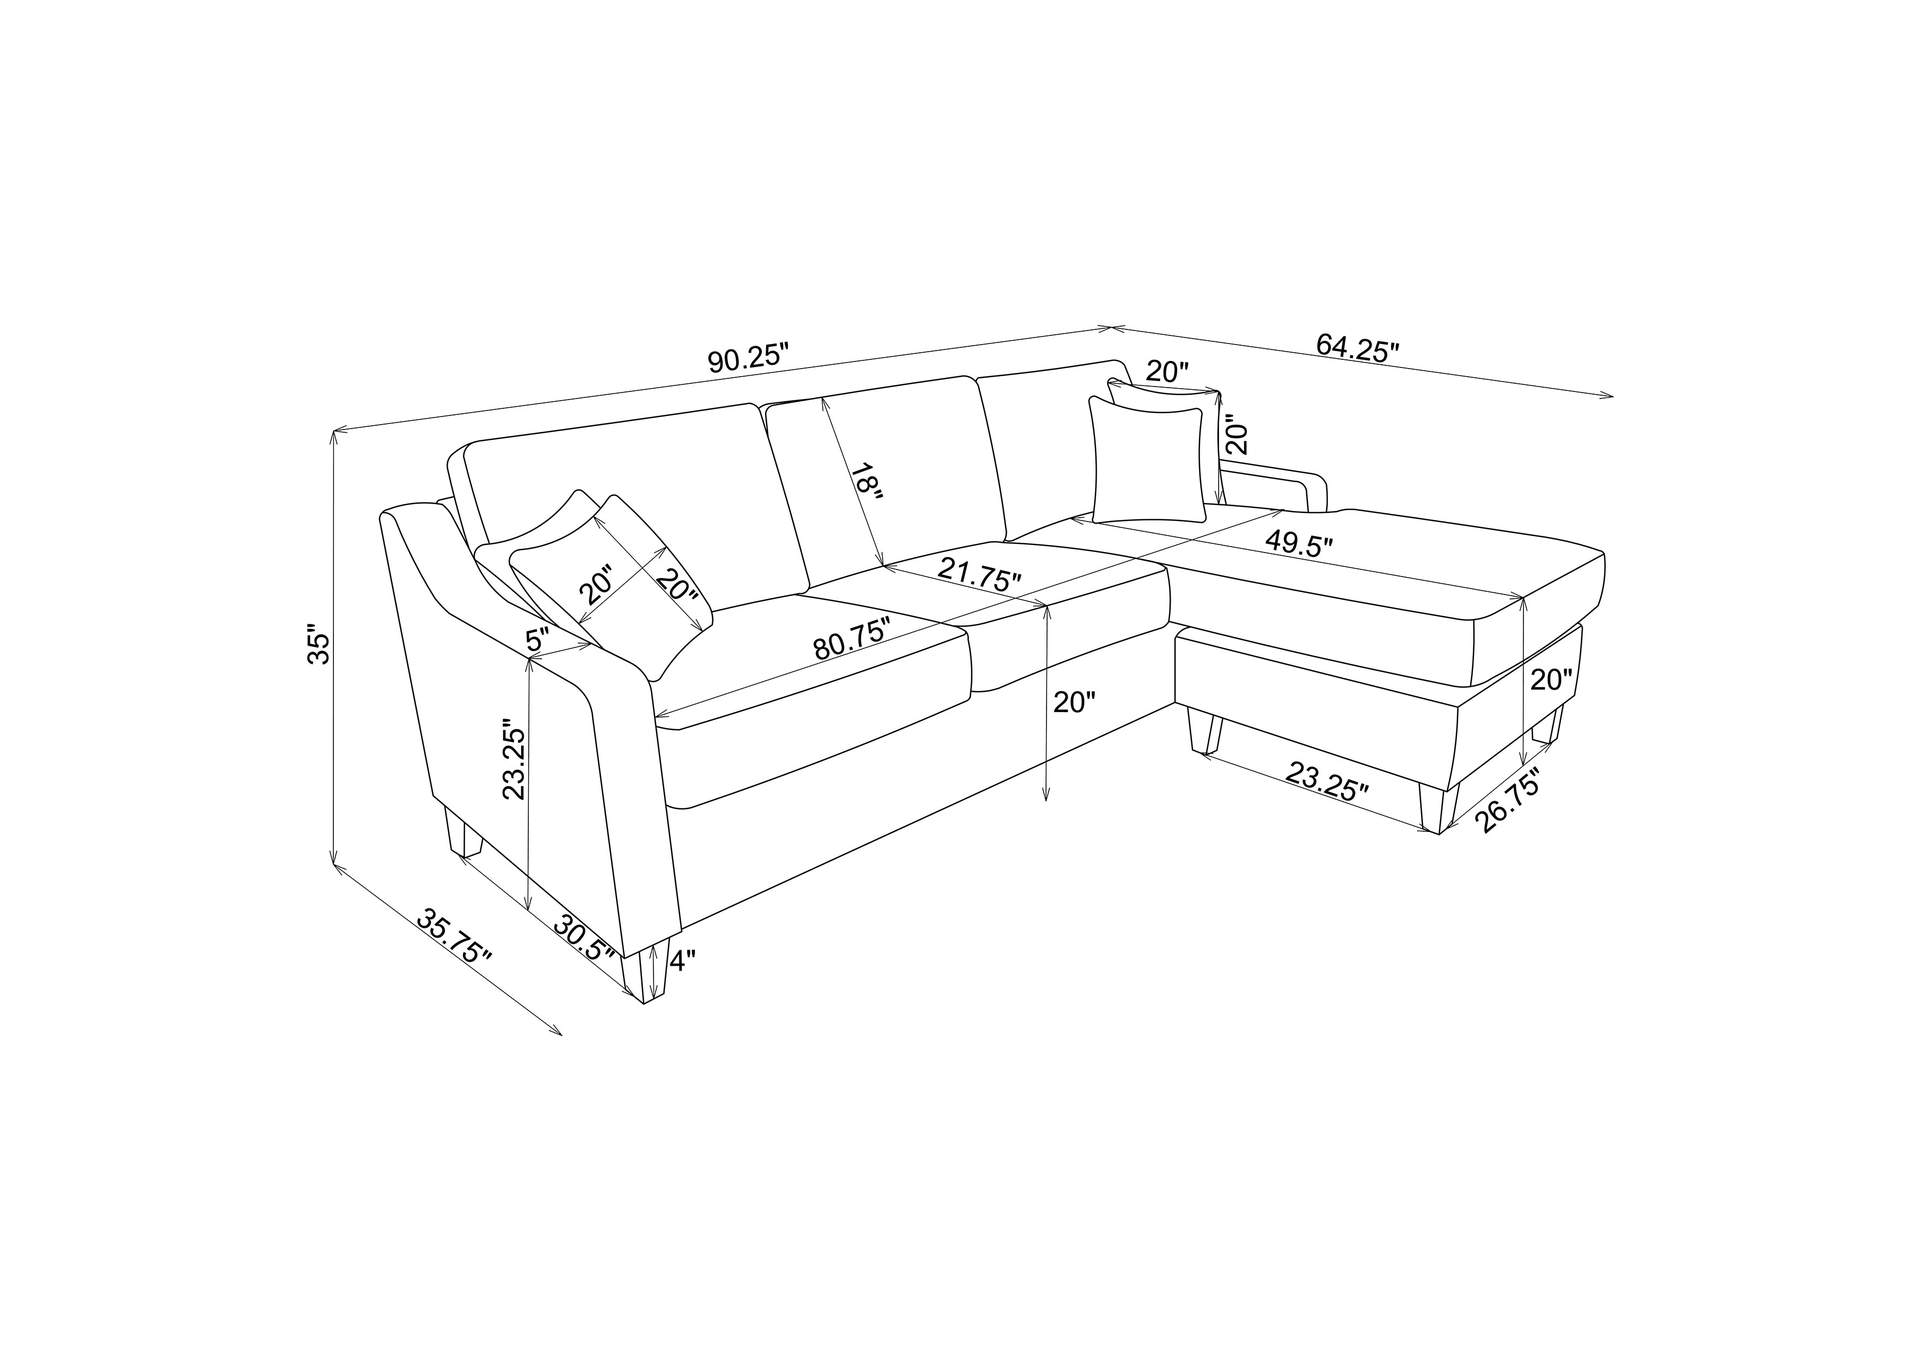 McLoughlin Upholstered Sectional Cream,Coaster Furniture